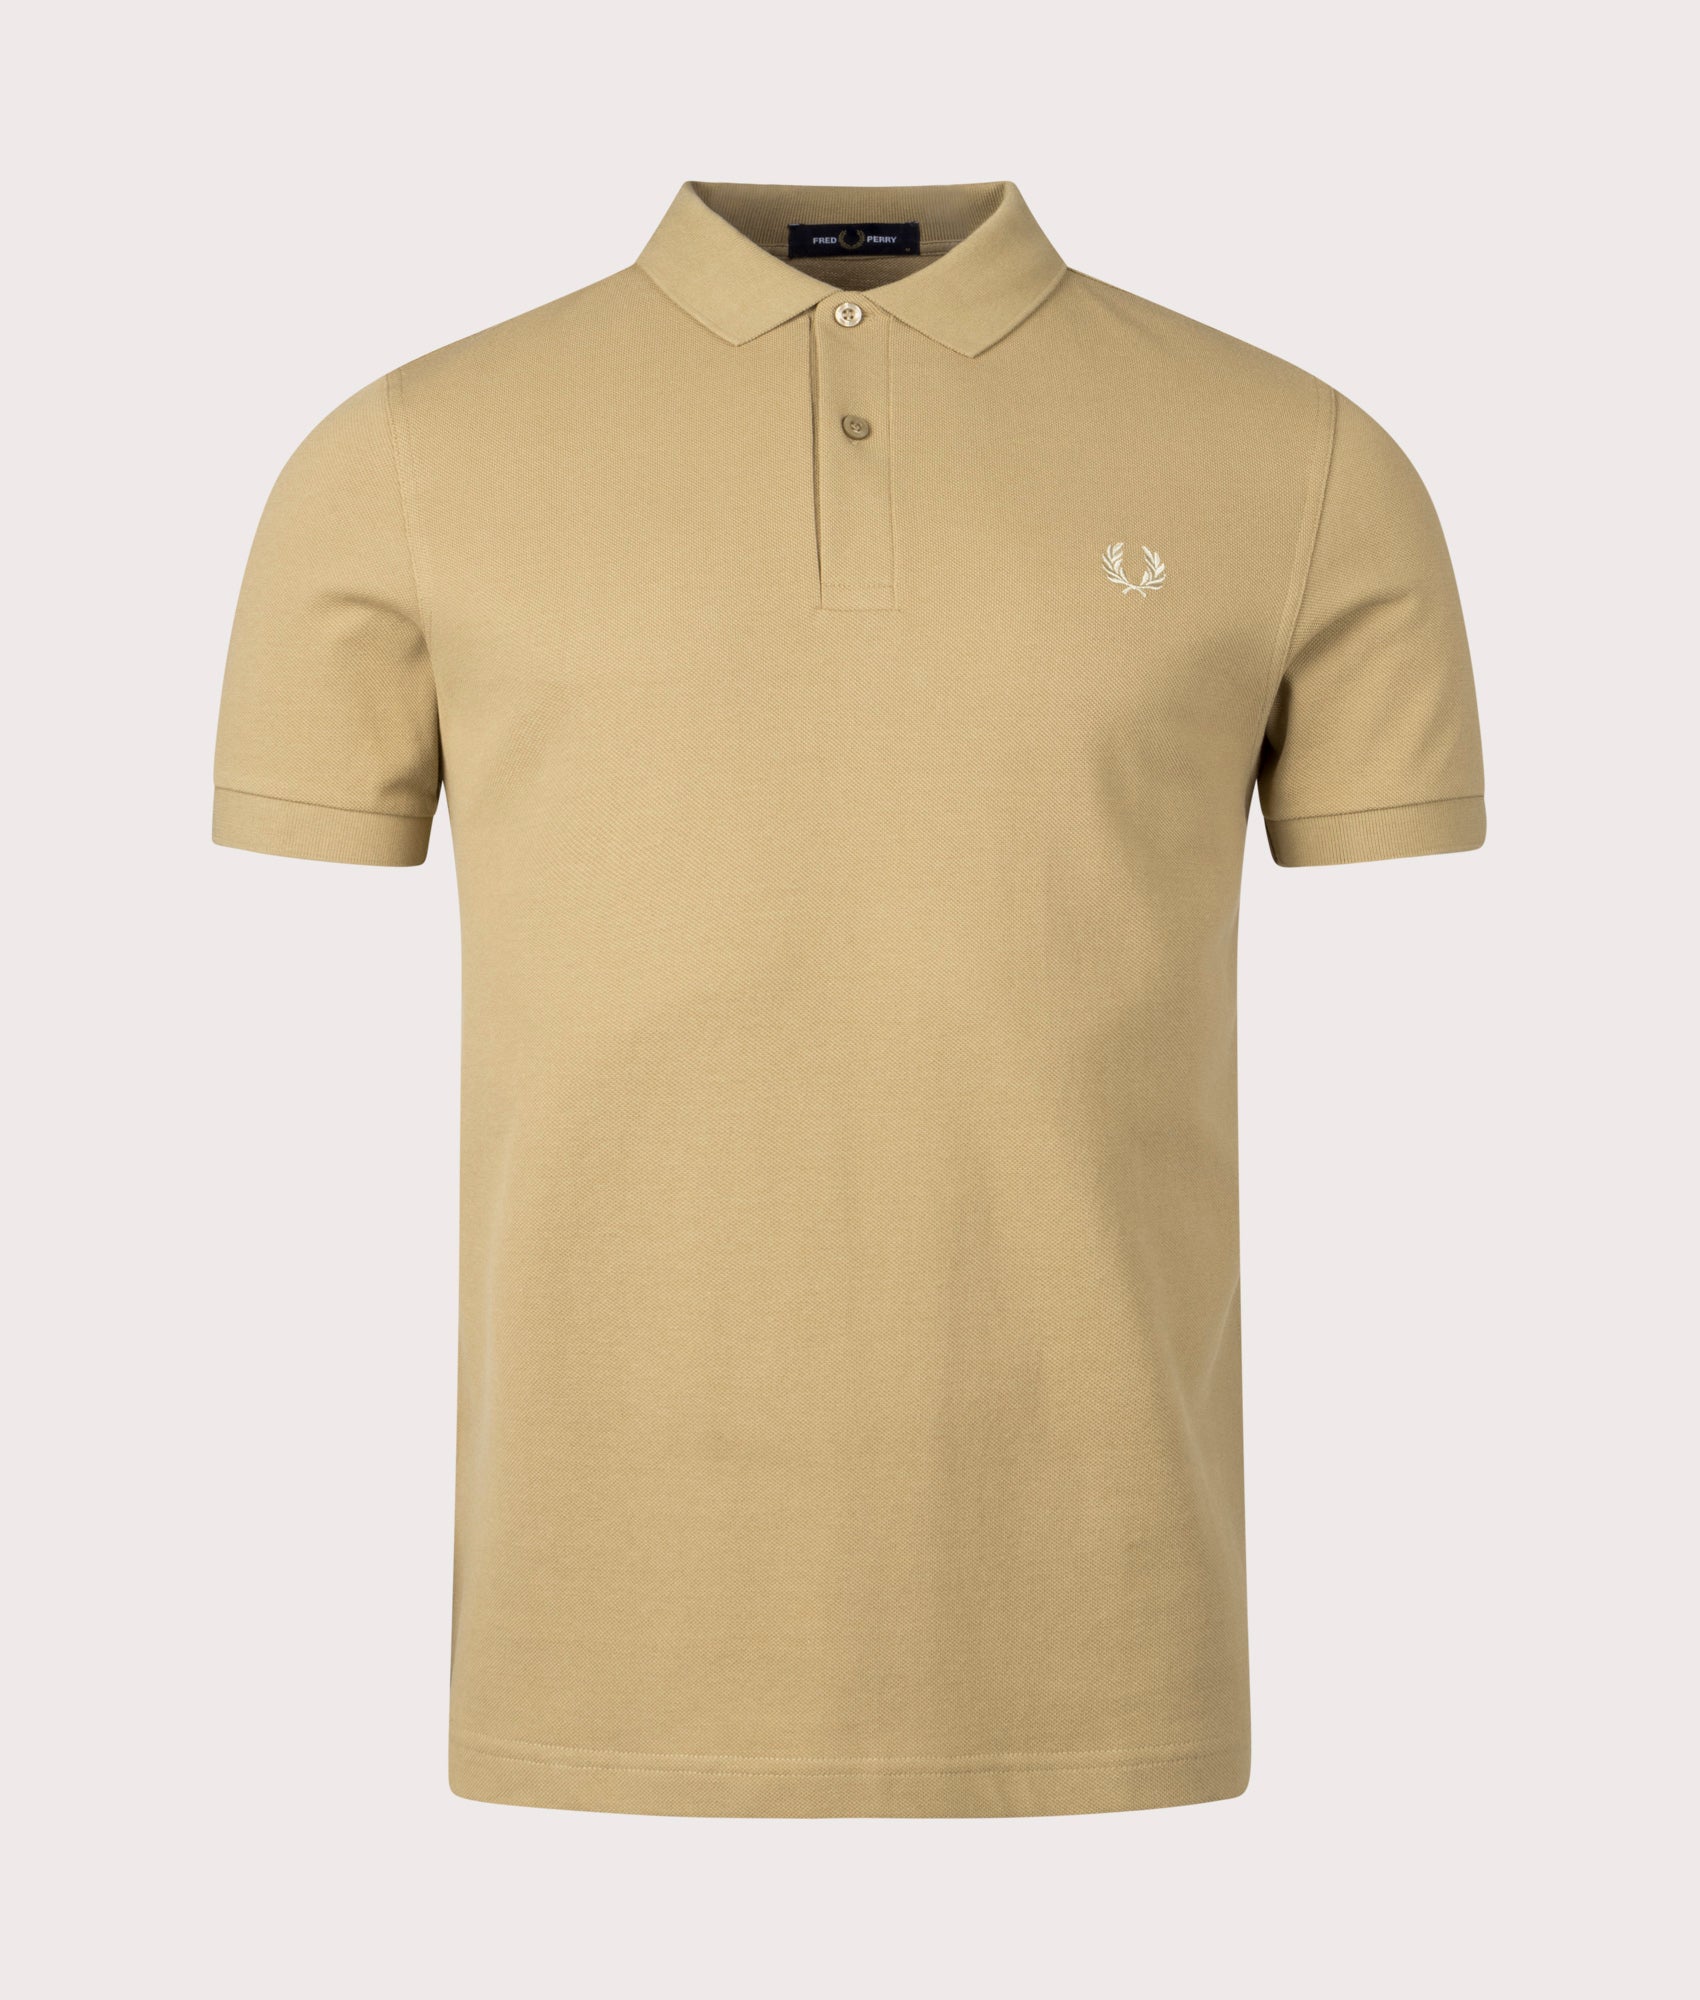 Fred Perry Mens Plain Fred Perry Shirt - Colour: V19 Warm Stone/Oatmeal - Size: Medium